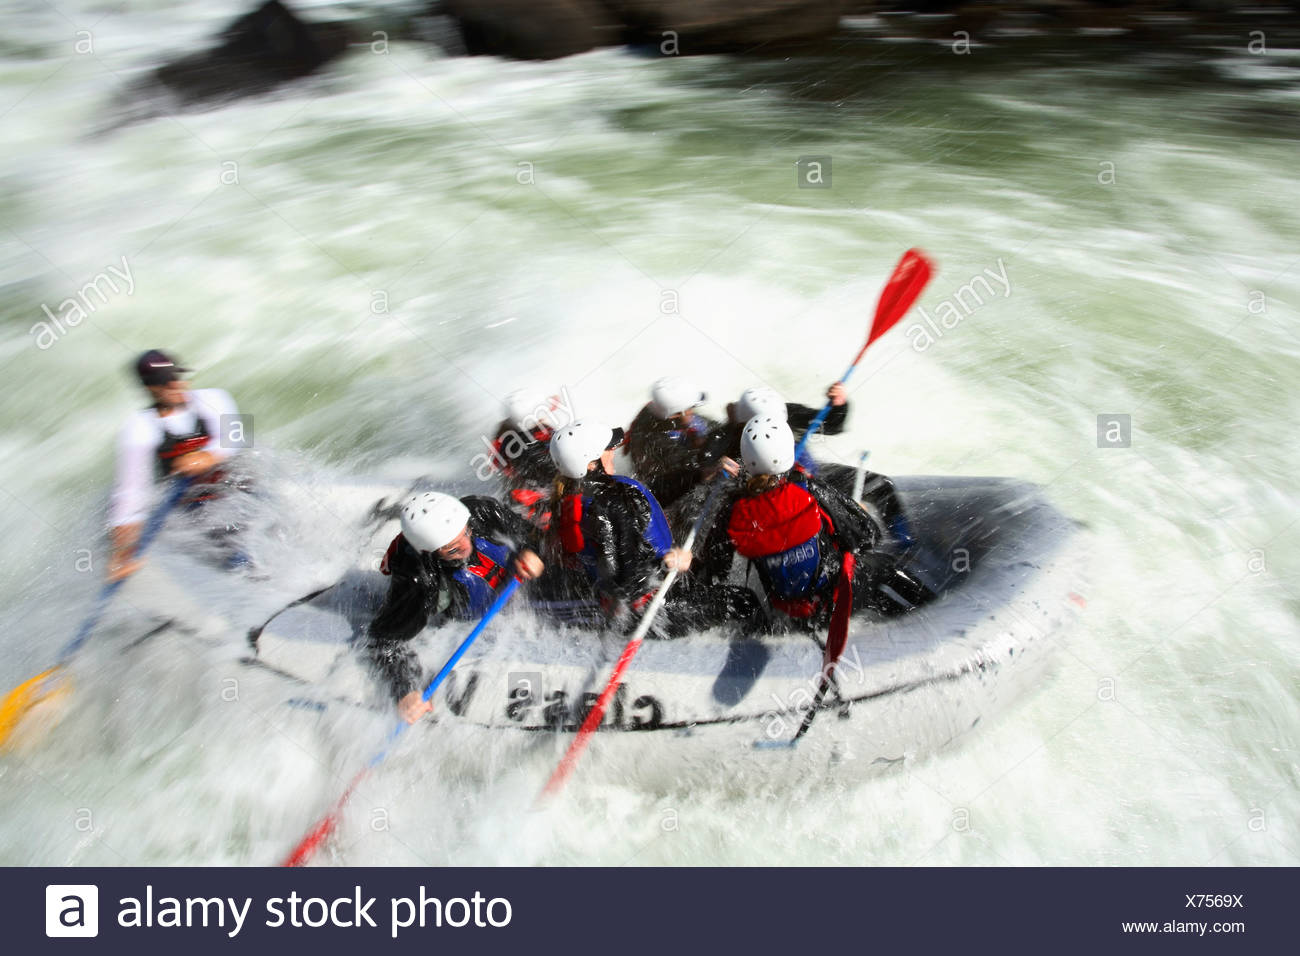 Unknown Rafters Roll Through The Infamous Pillow Rock Rapid On The